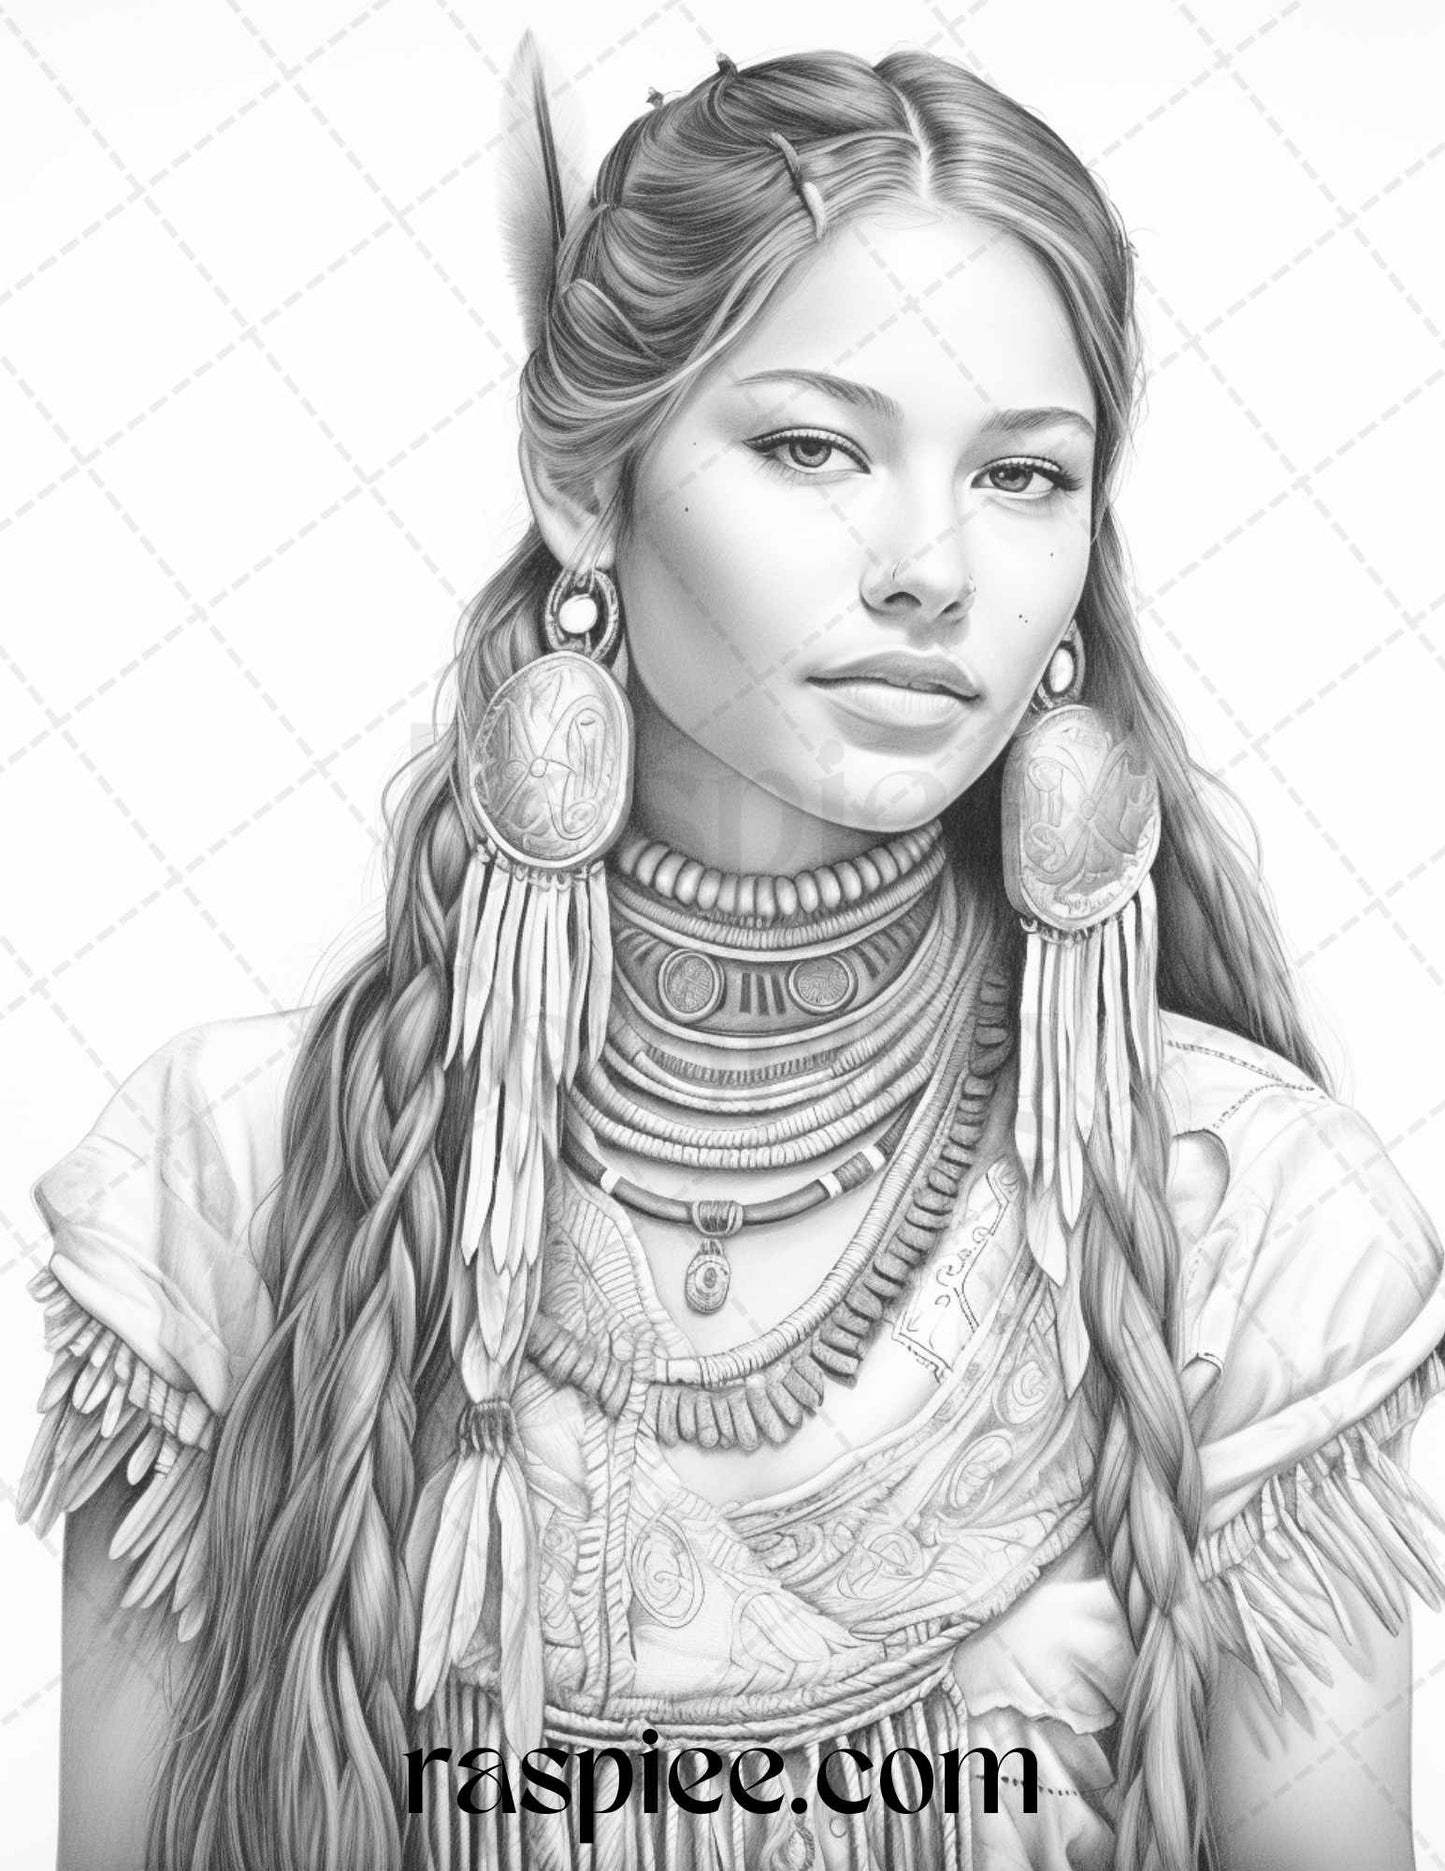 Native American Portrait Grayscale Coloring Pages Printable for Adults, PDF File Instant Download - Raspiee Coloring